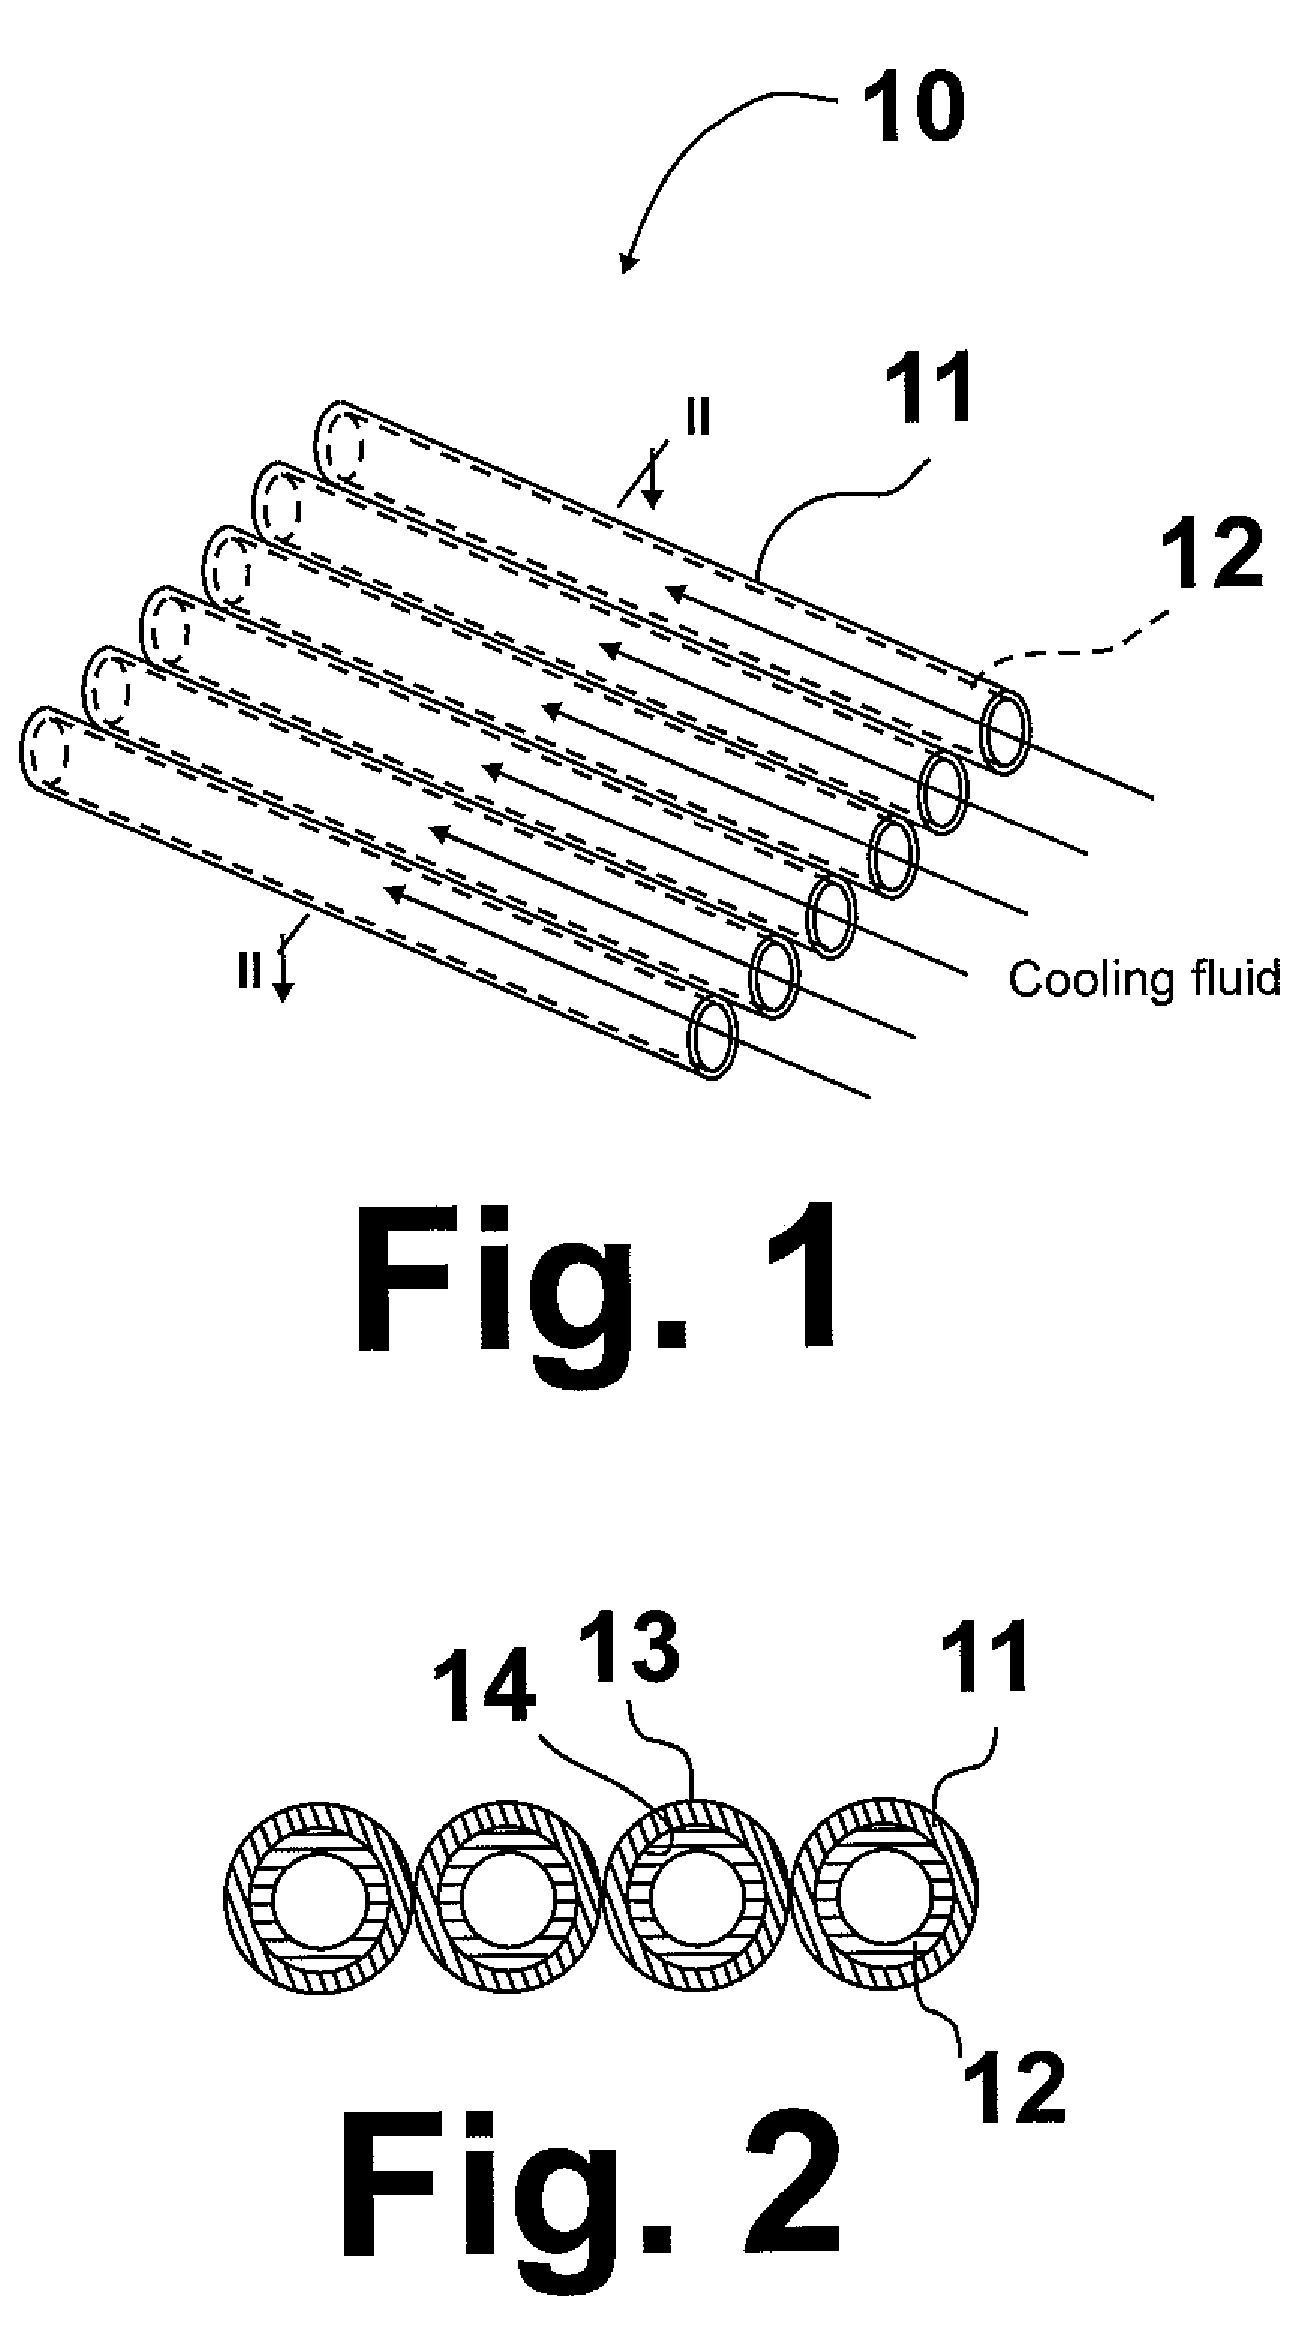 Supported metal membrane with internal cooling for H2 separation